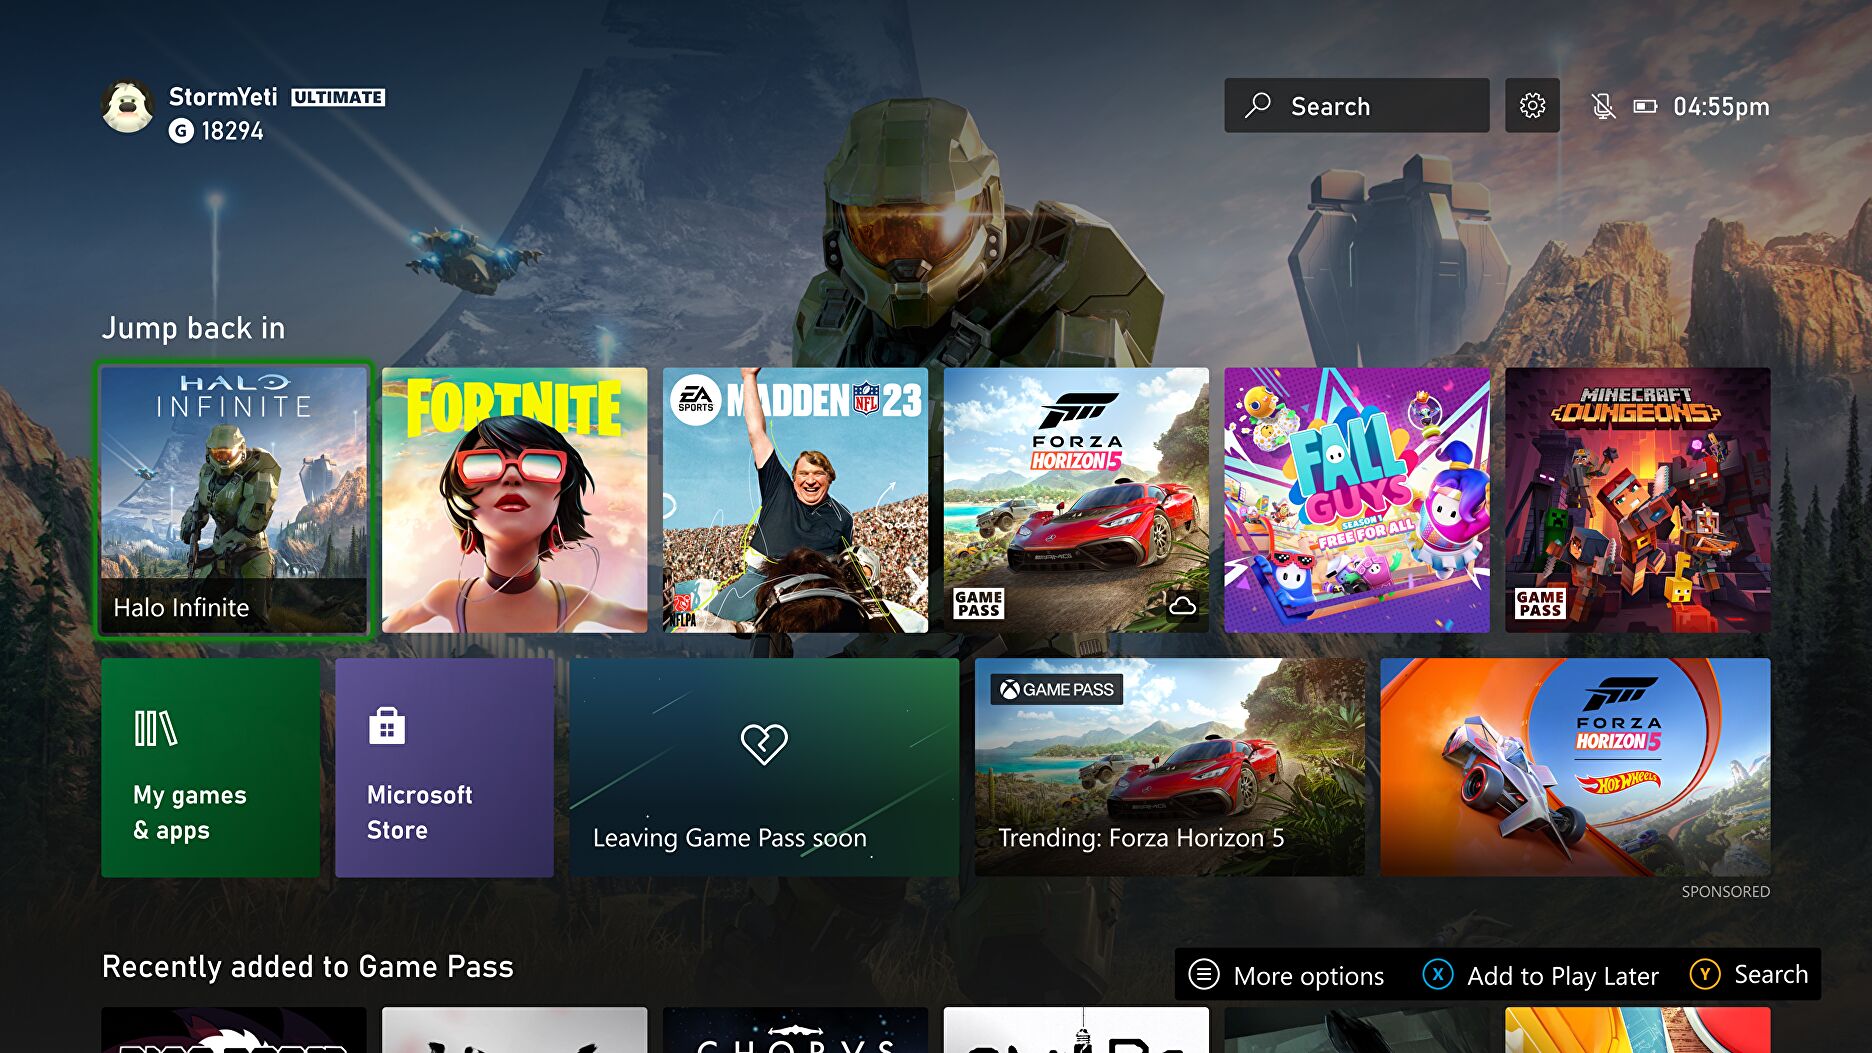 Xbox is finally getting a new UI, and it looks very familiar